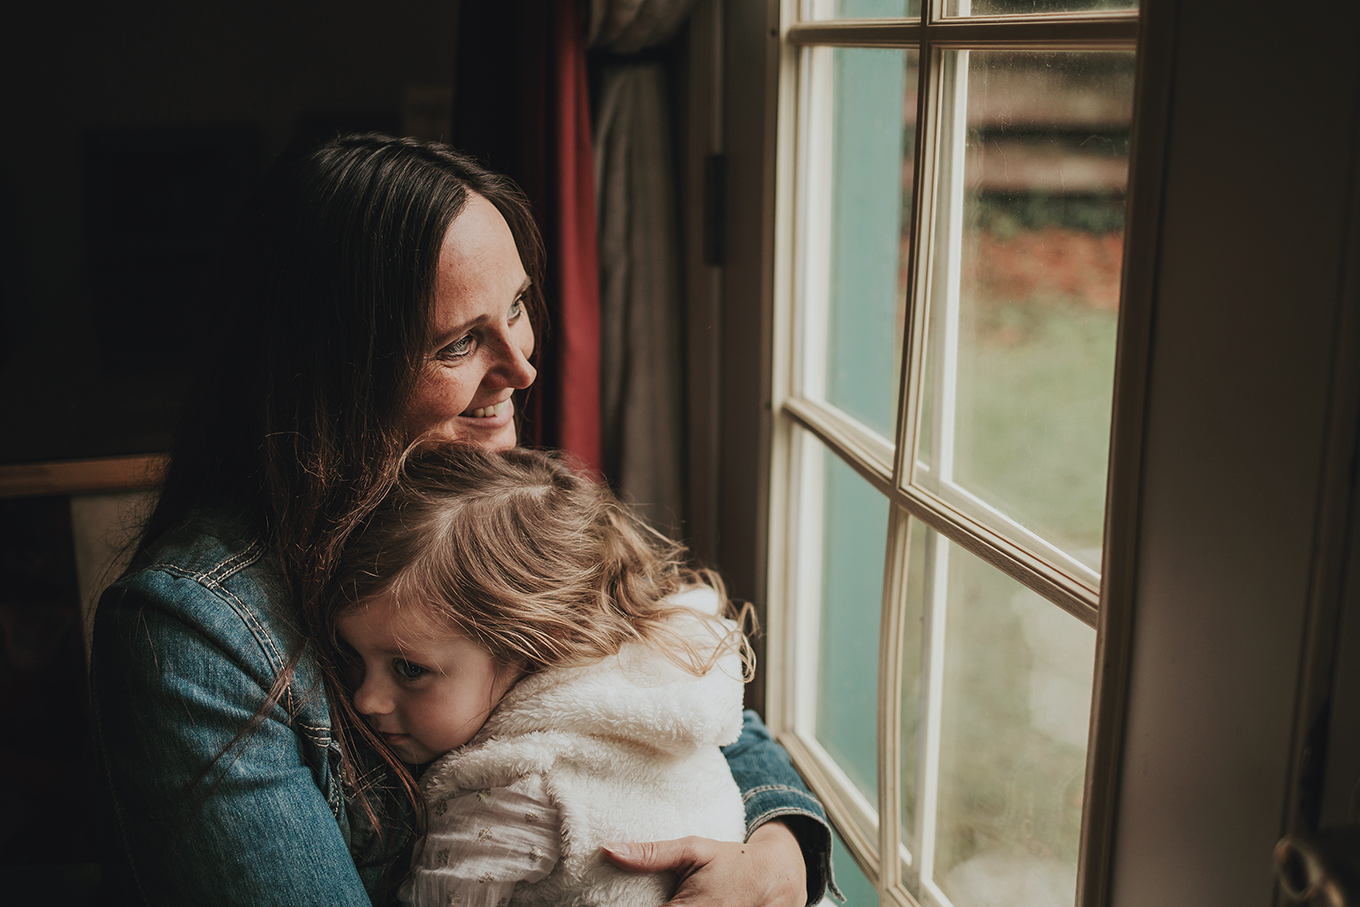 If we focus on all that our life isn't, we miss all the beauty that our life IS. 4 powerful ways to combat comparison in motherhood.